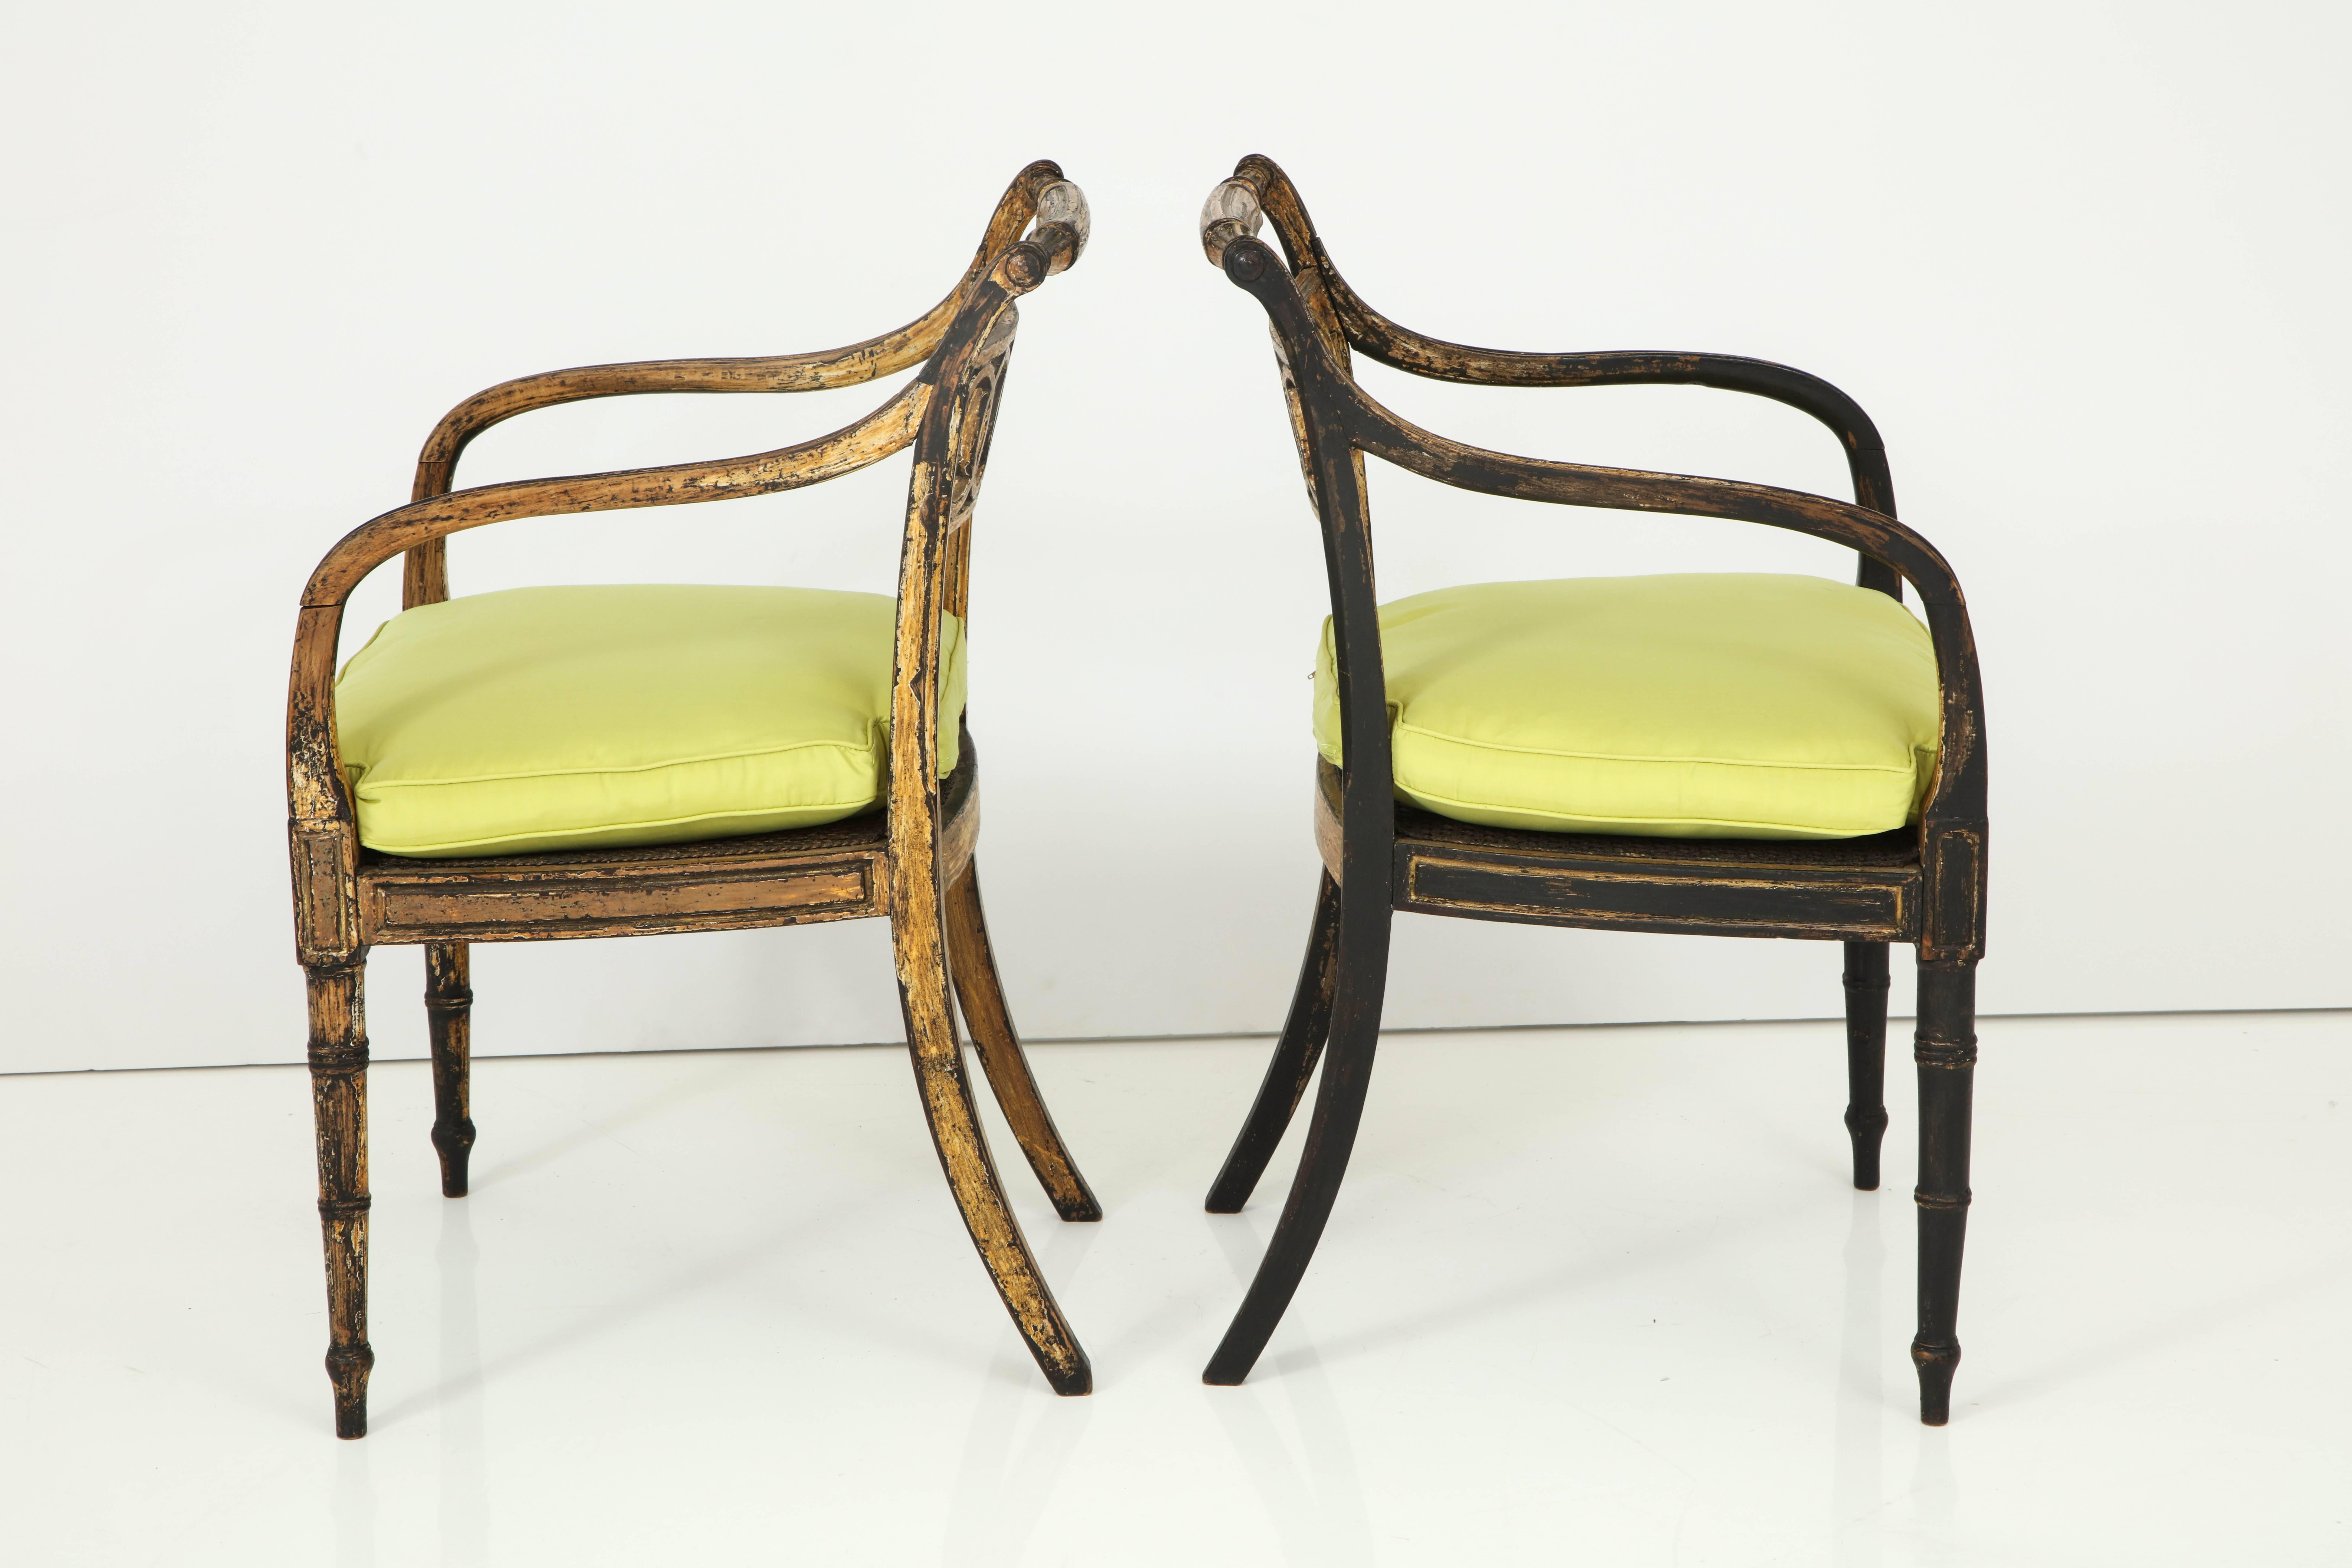 19th Century Pair of English Regency Painted and Parcel-Gilt Side Chairs